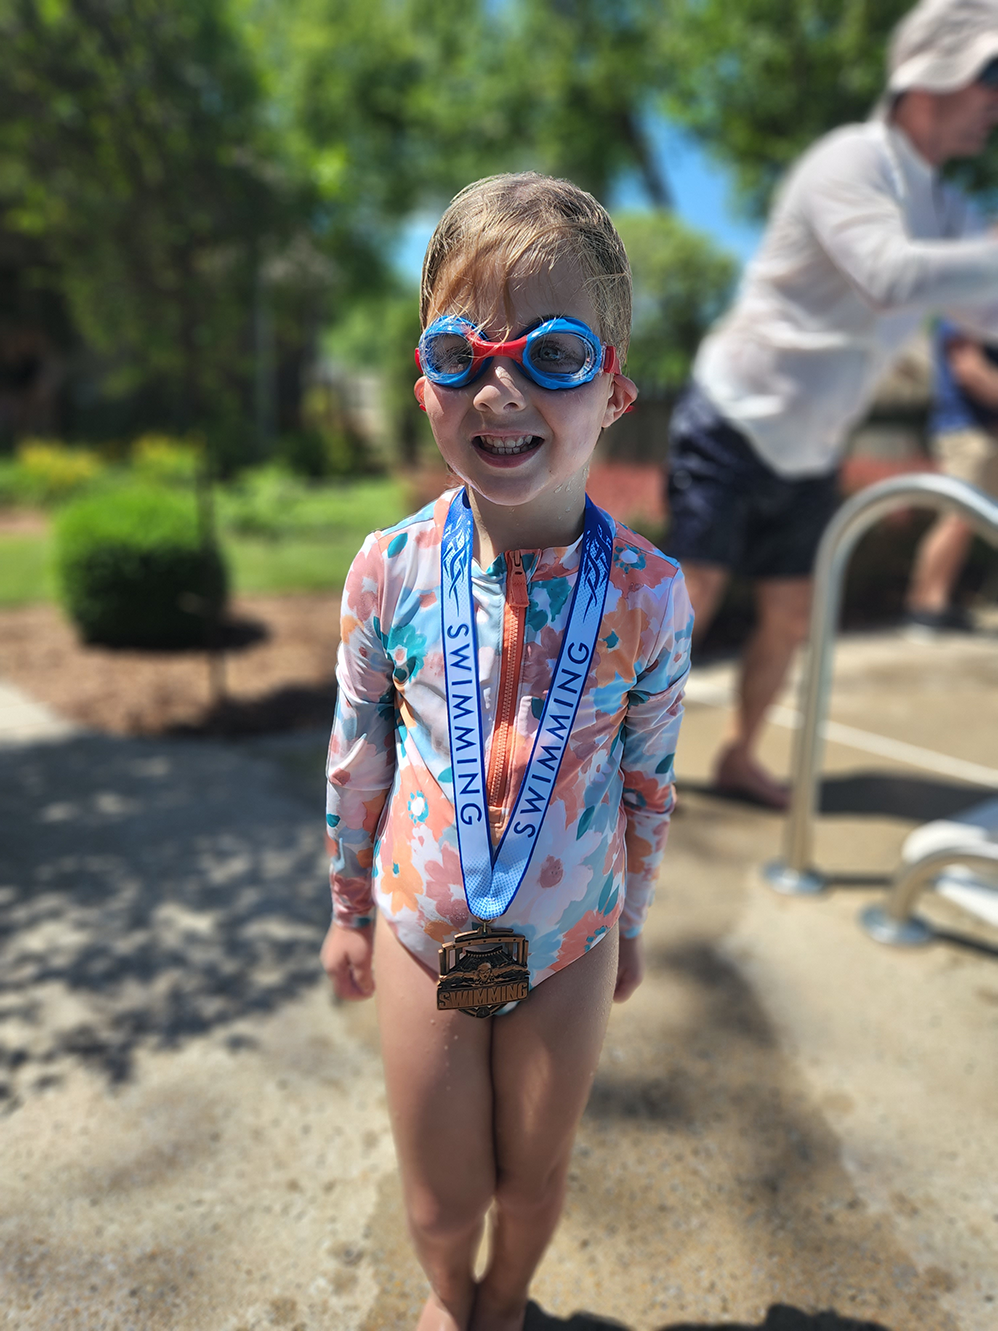 A young girl stands smiling poolside while wearing swim goggles and a completion medal at the end of her swim lessons.